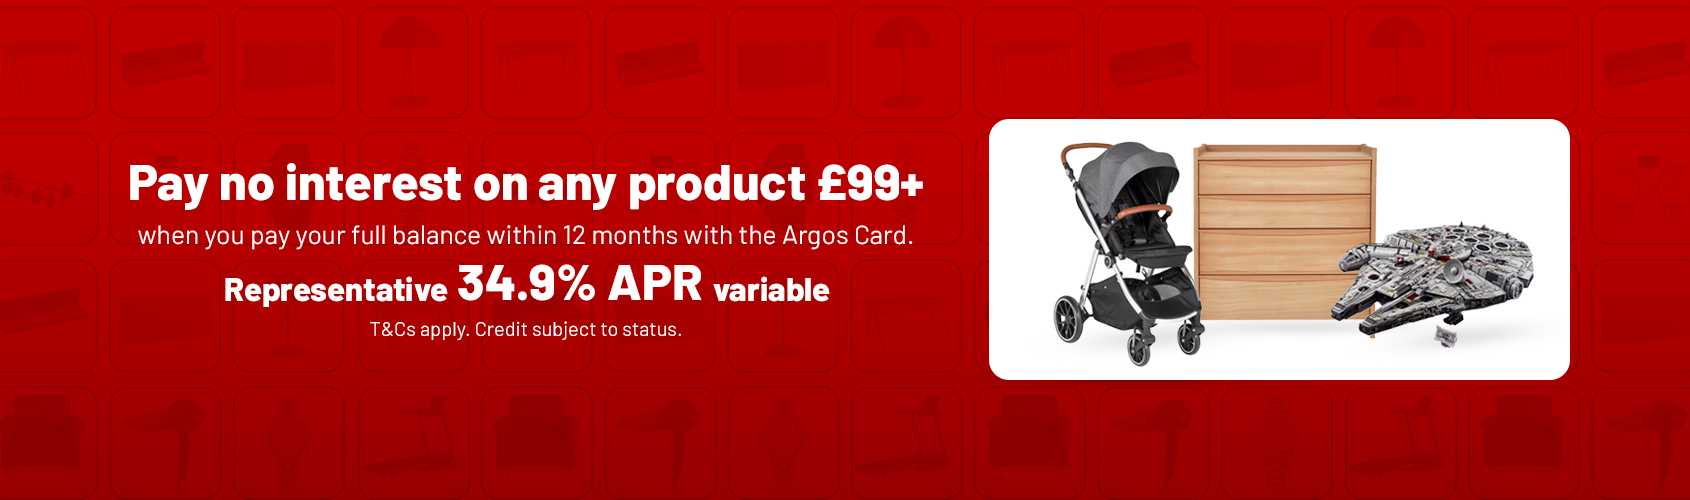 Pay no interest on any product £99+ when you payyour full balance within 12 months with the Argos card. Representative 34.9% APR variable. T&Cs apply. Credit subject to status.